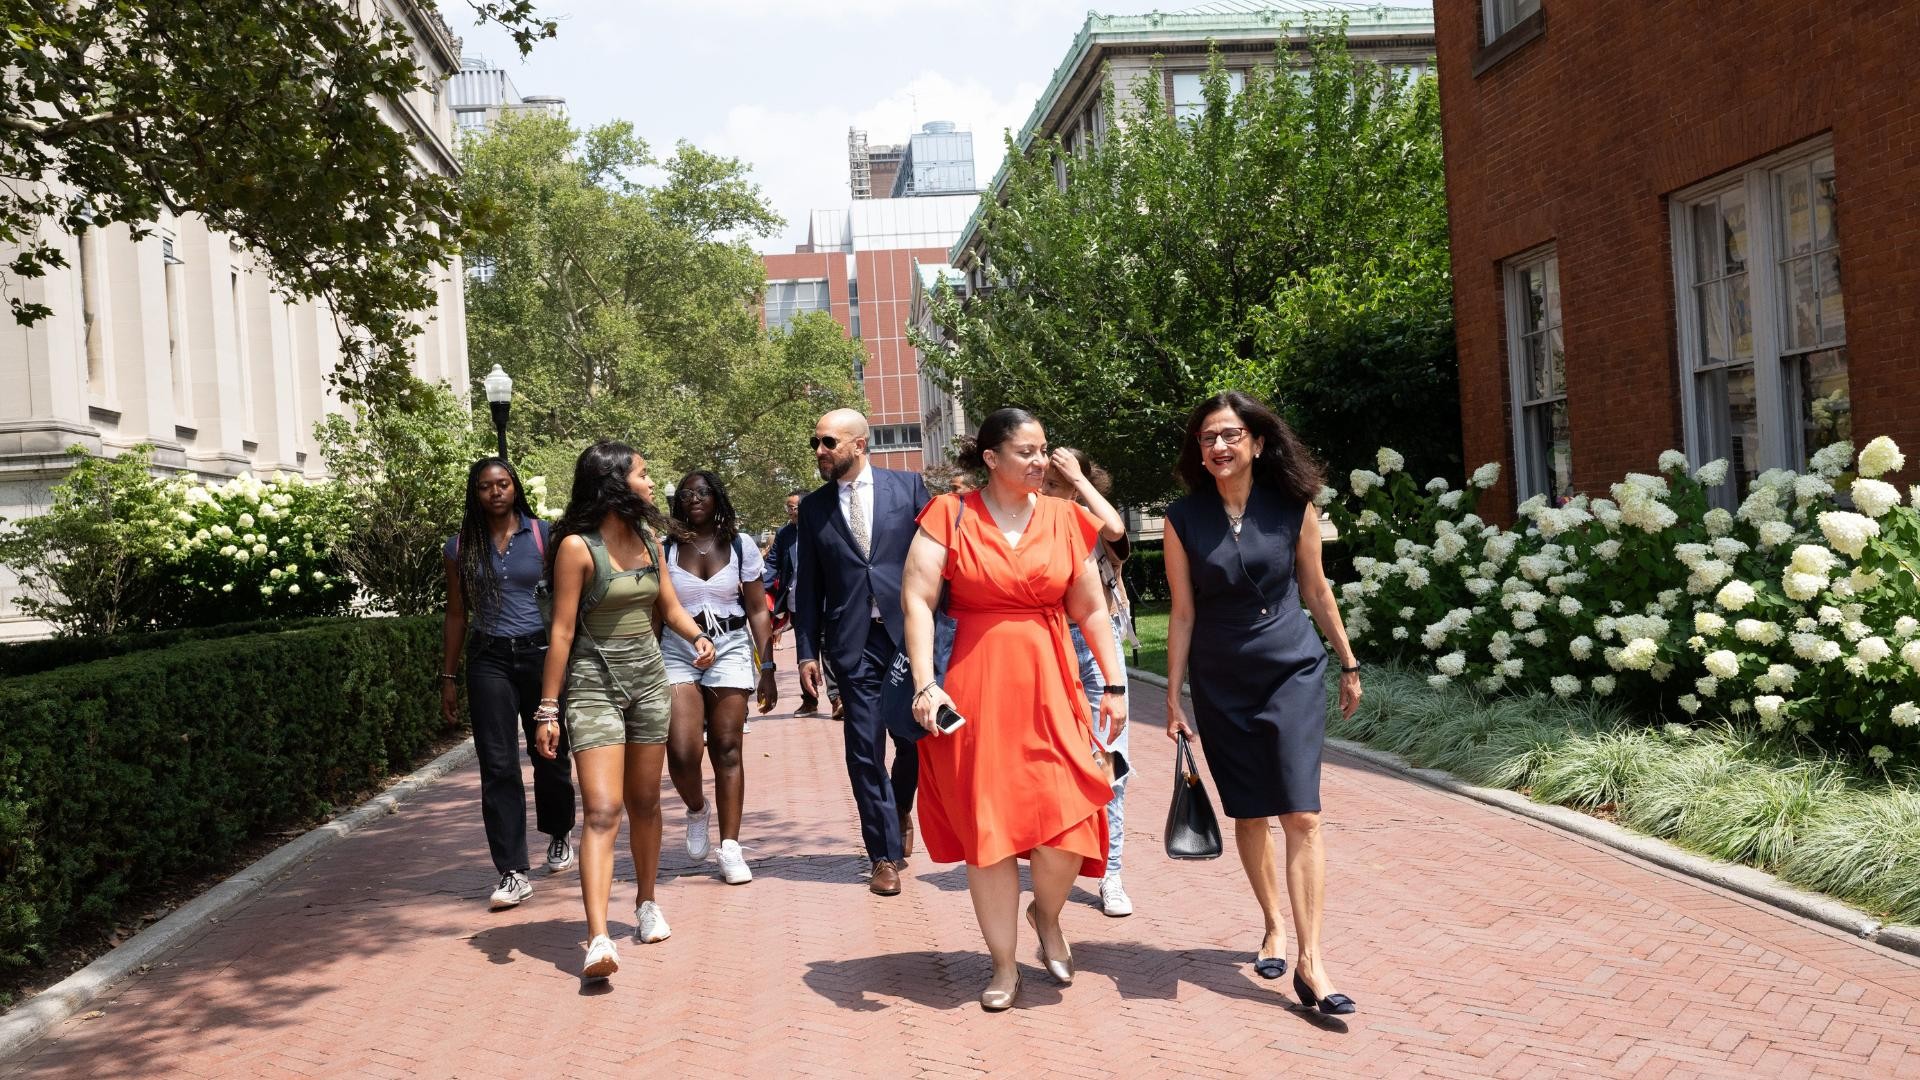 President Minouche Shafik walks with Executive Director of the DDC, Sasha Wells, along with DDC students.